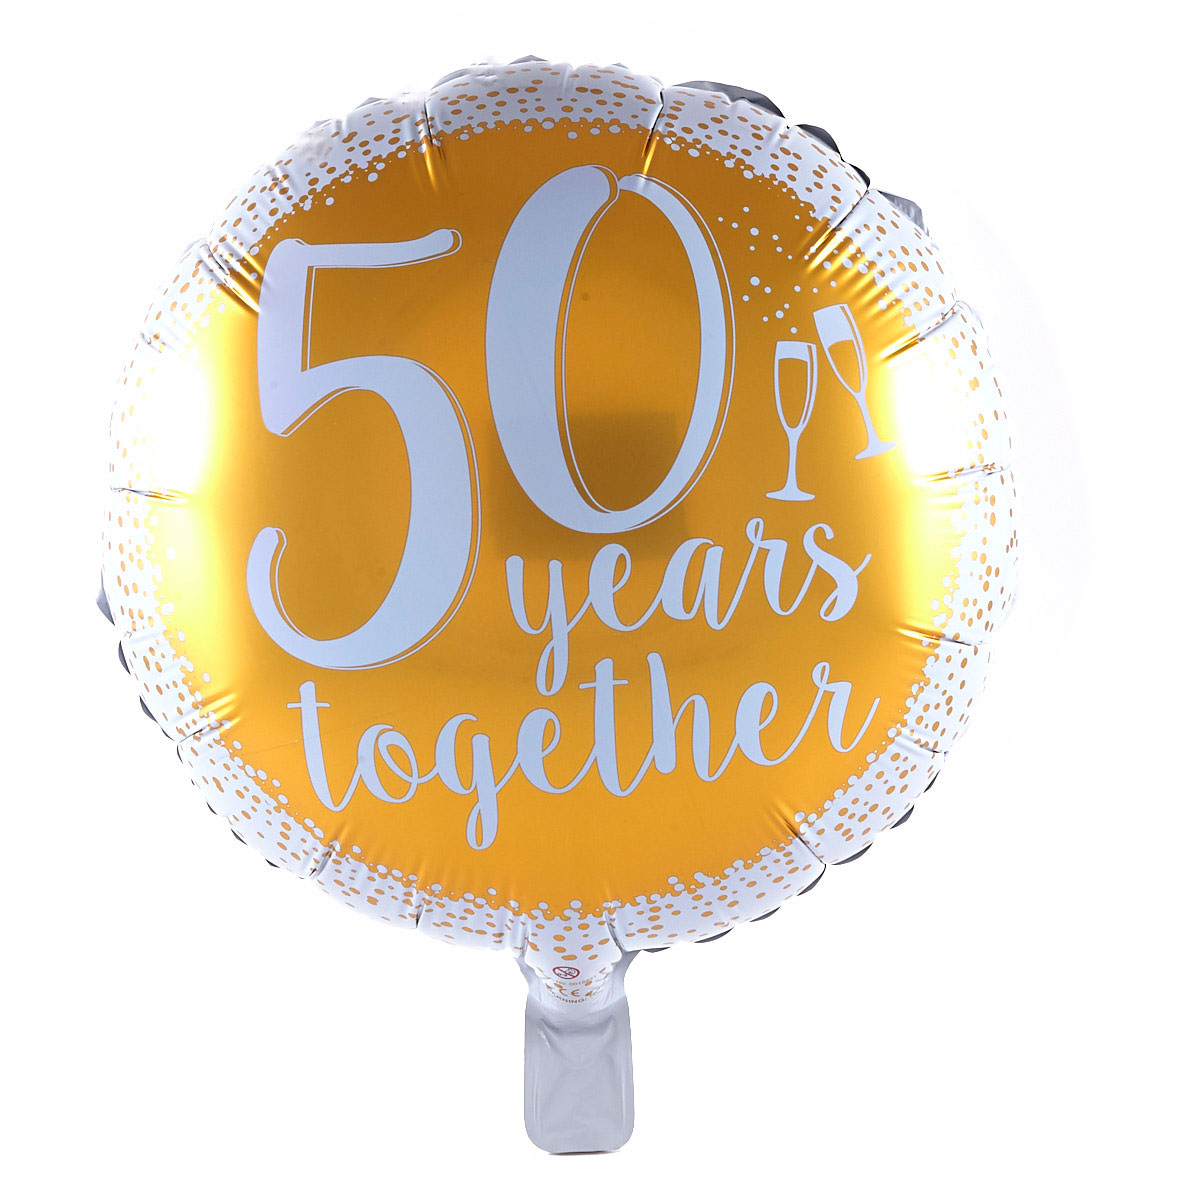 Buy 50 Years Together Gold Anniversary Foil Helium Balloon for GBP 2.49 ...